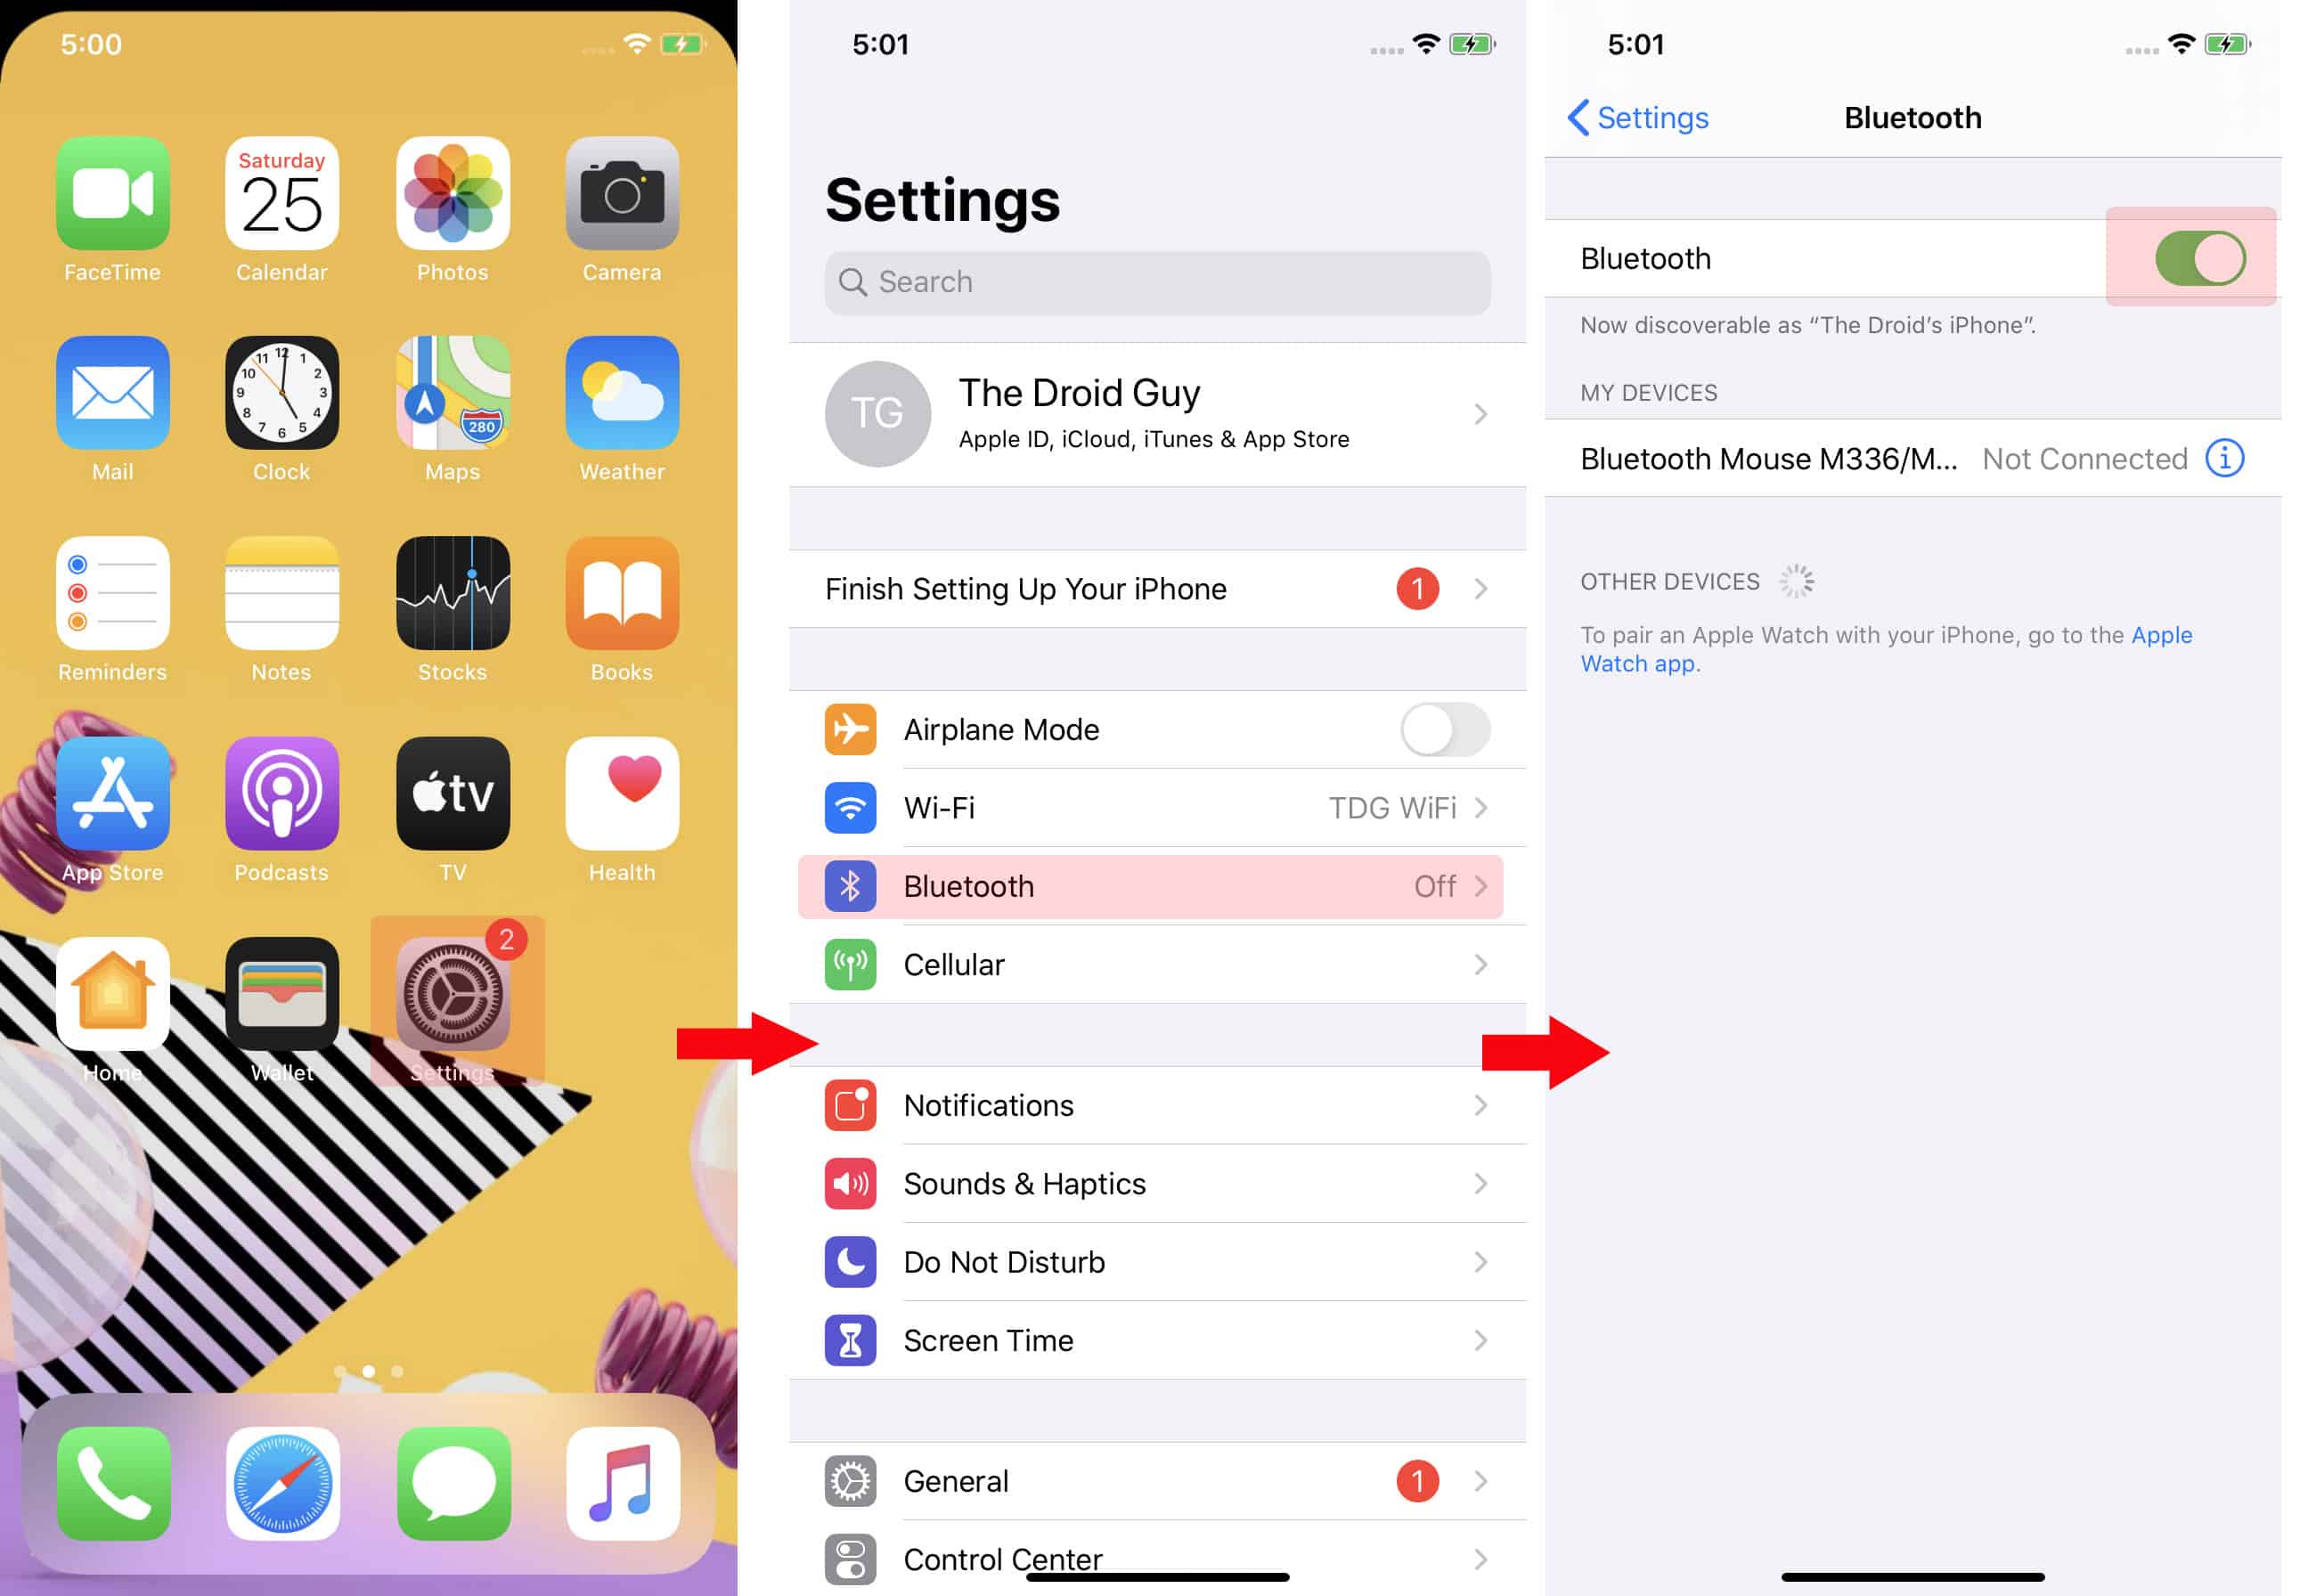 How To Connect Bluetooth To Iphone